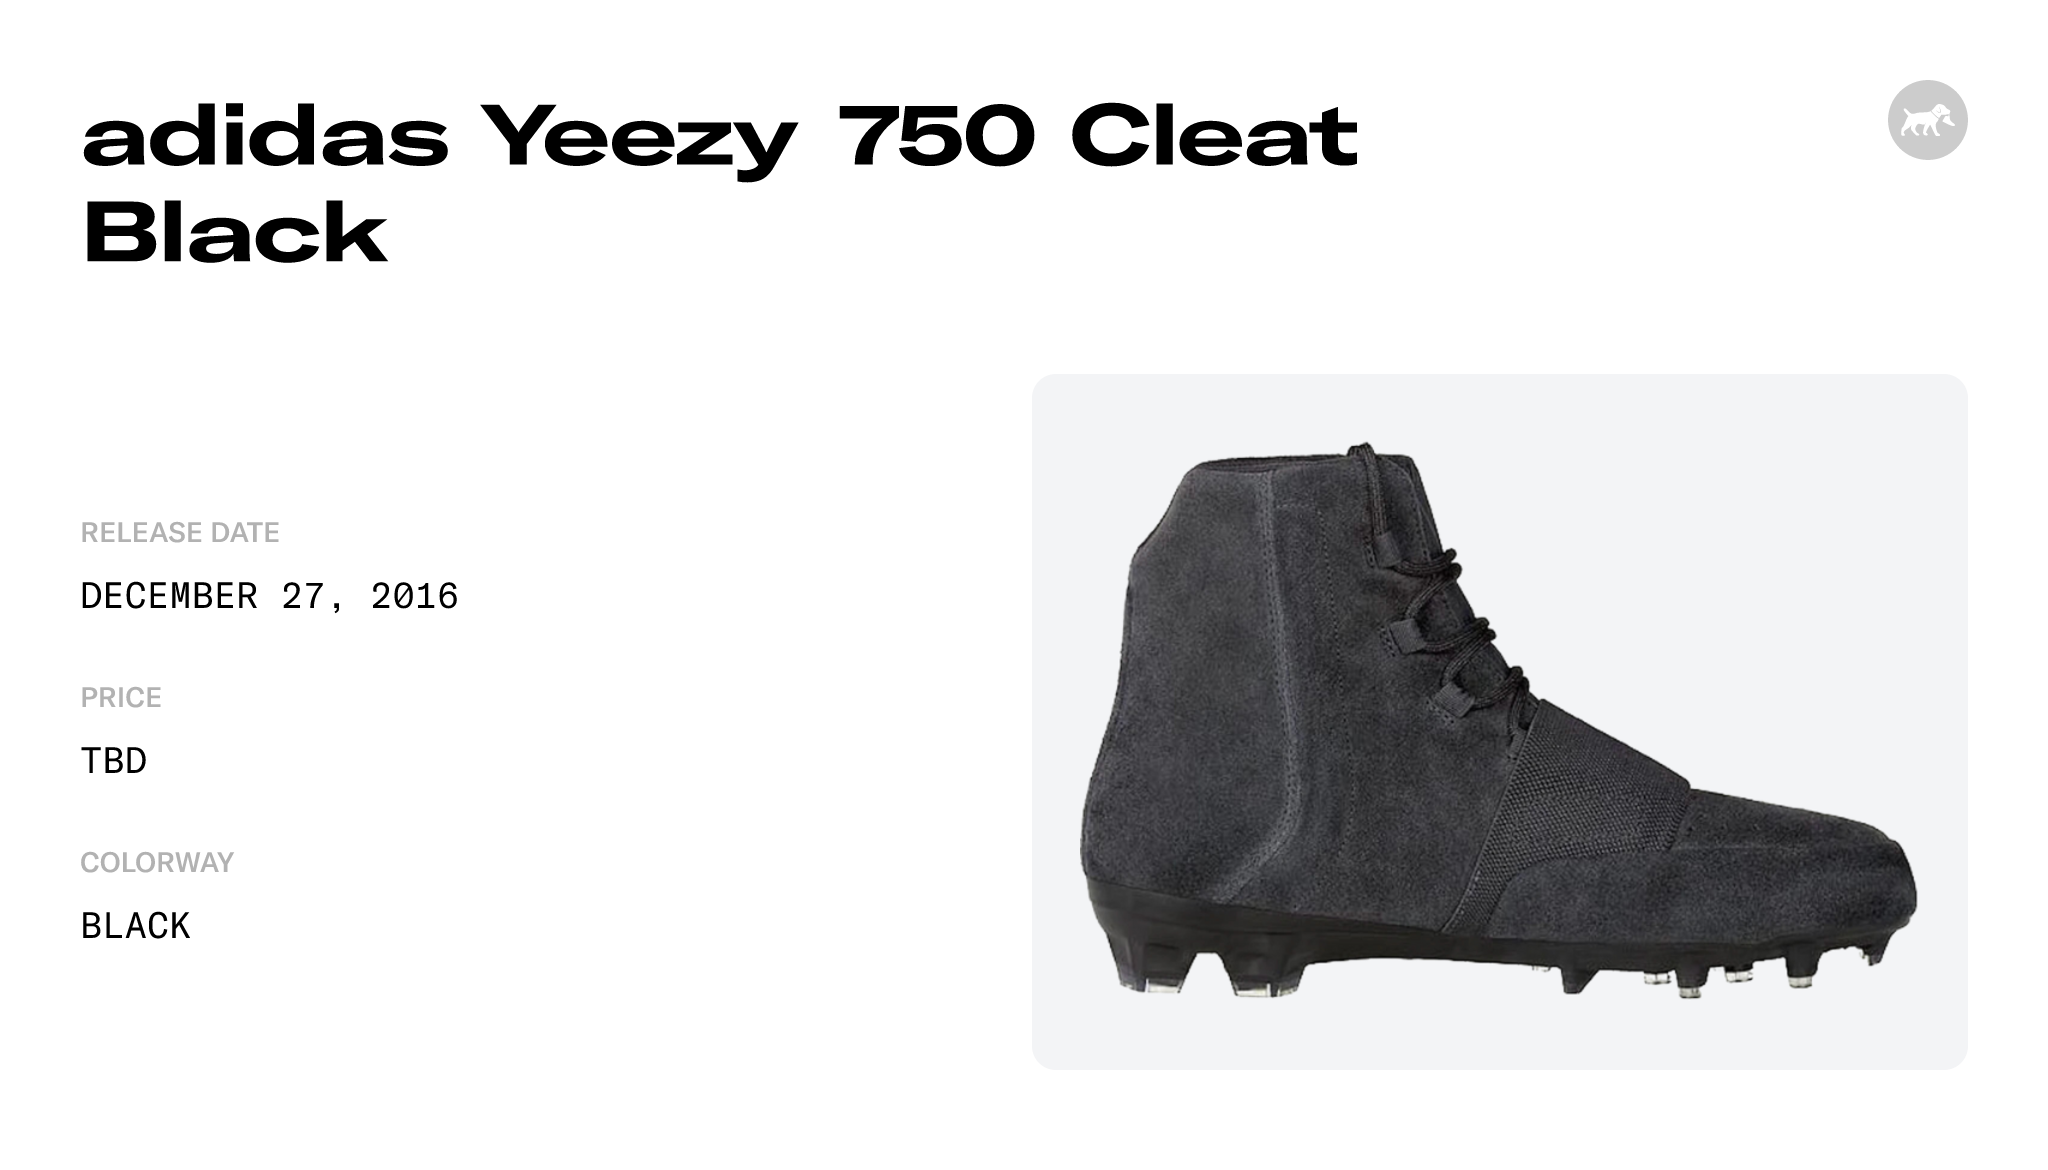 adidas Yeezy 750 Cleat Black Raffles and Release Date